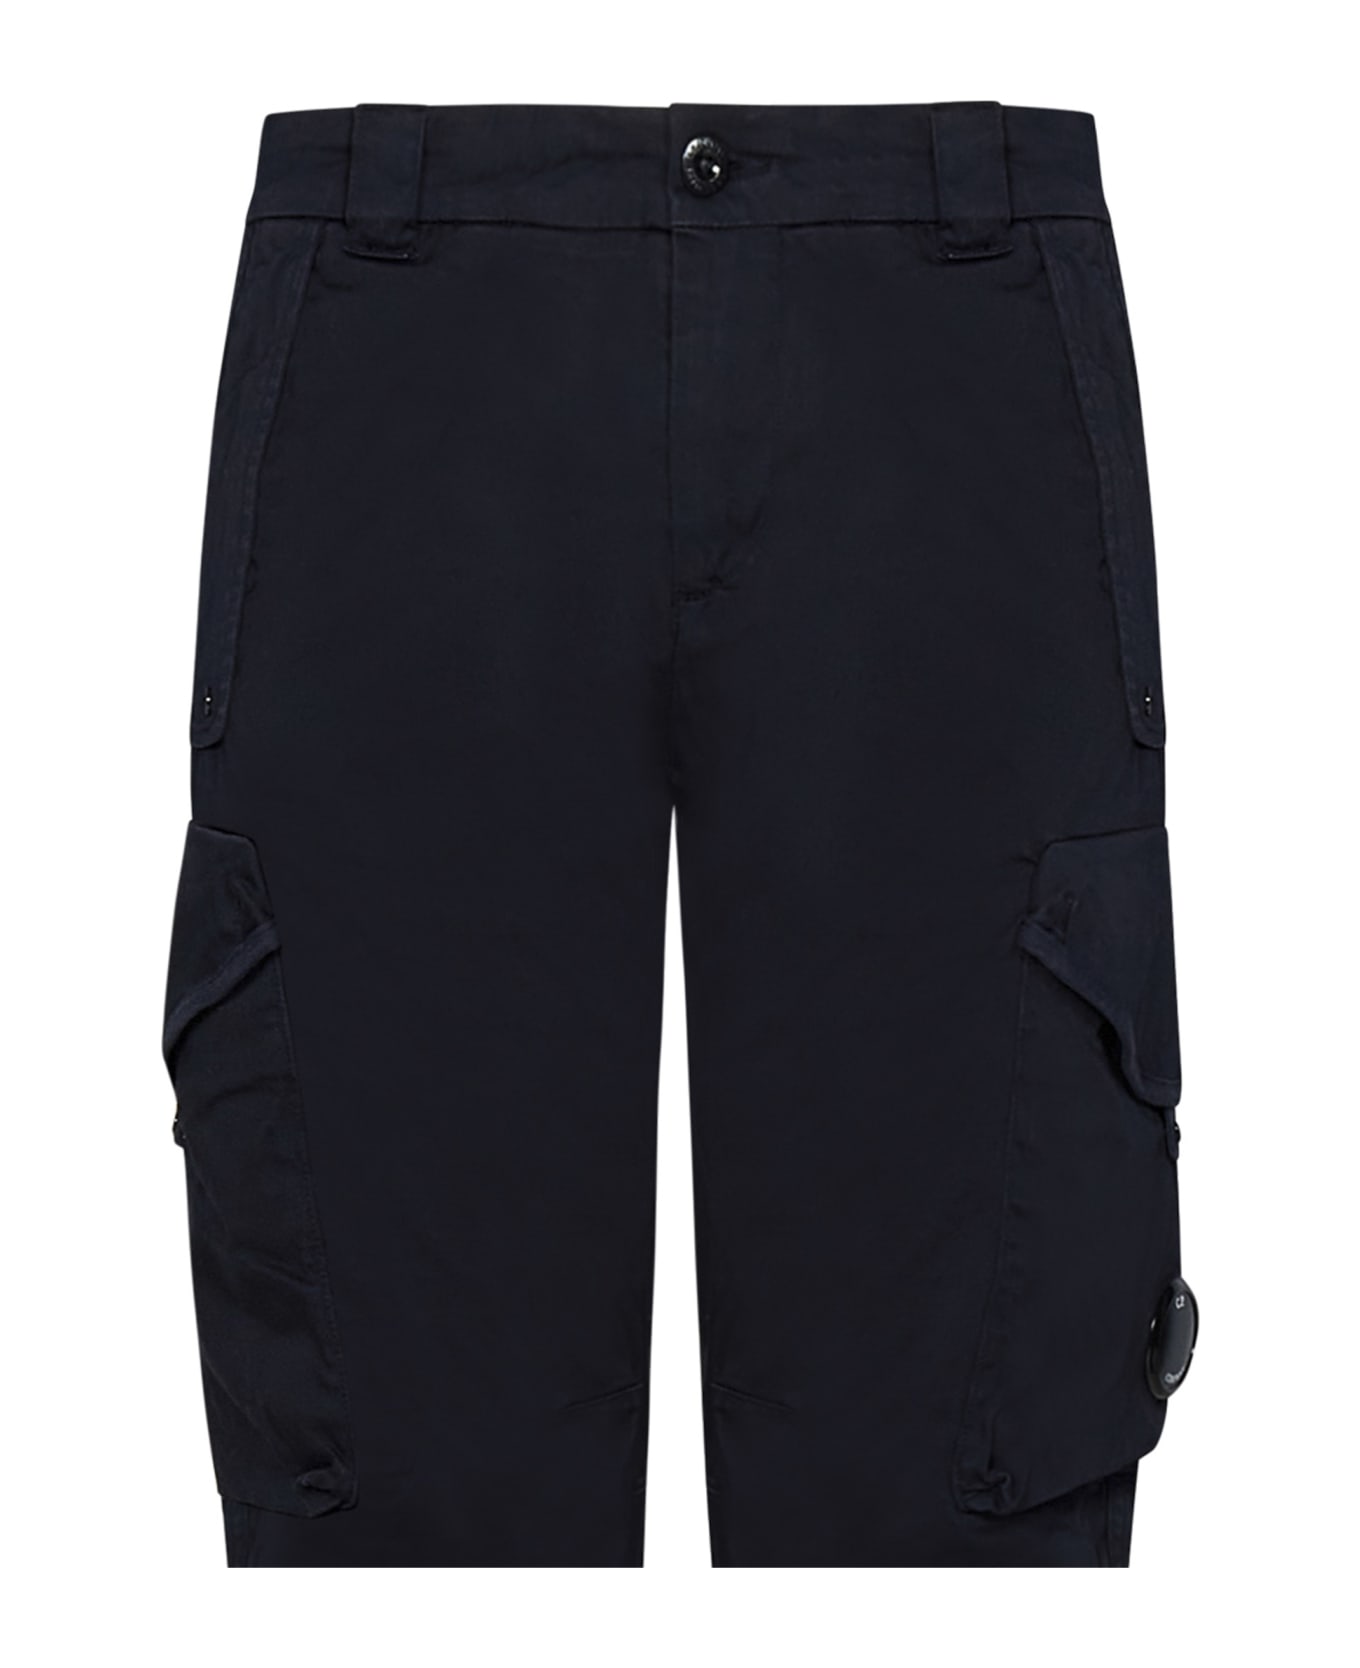 C.P. Company Trousers - TOTAL ECLIPSE ボトムス